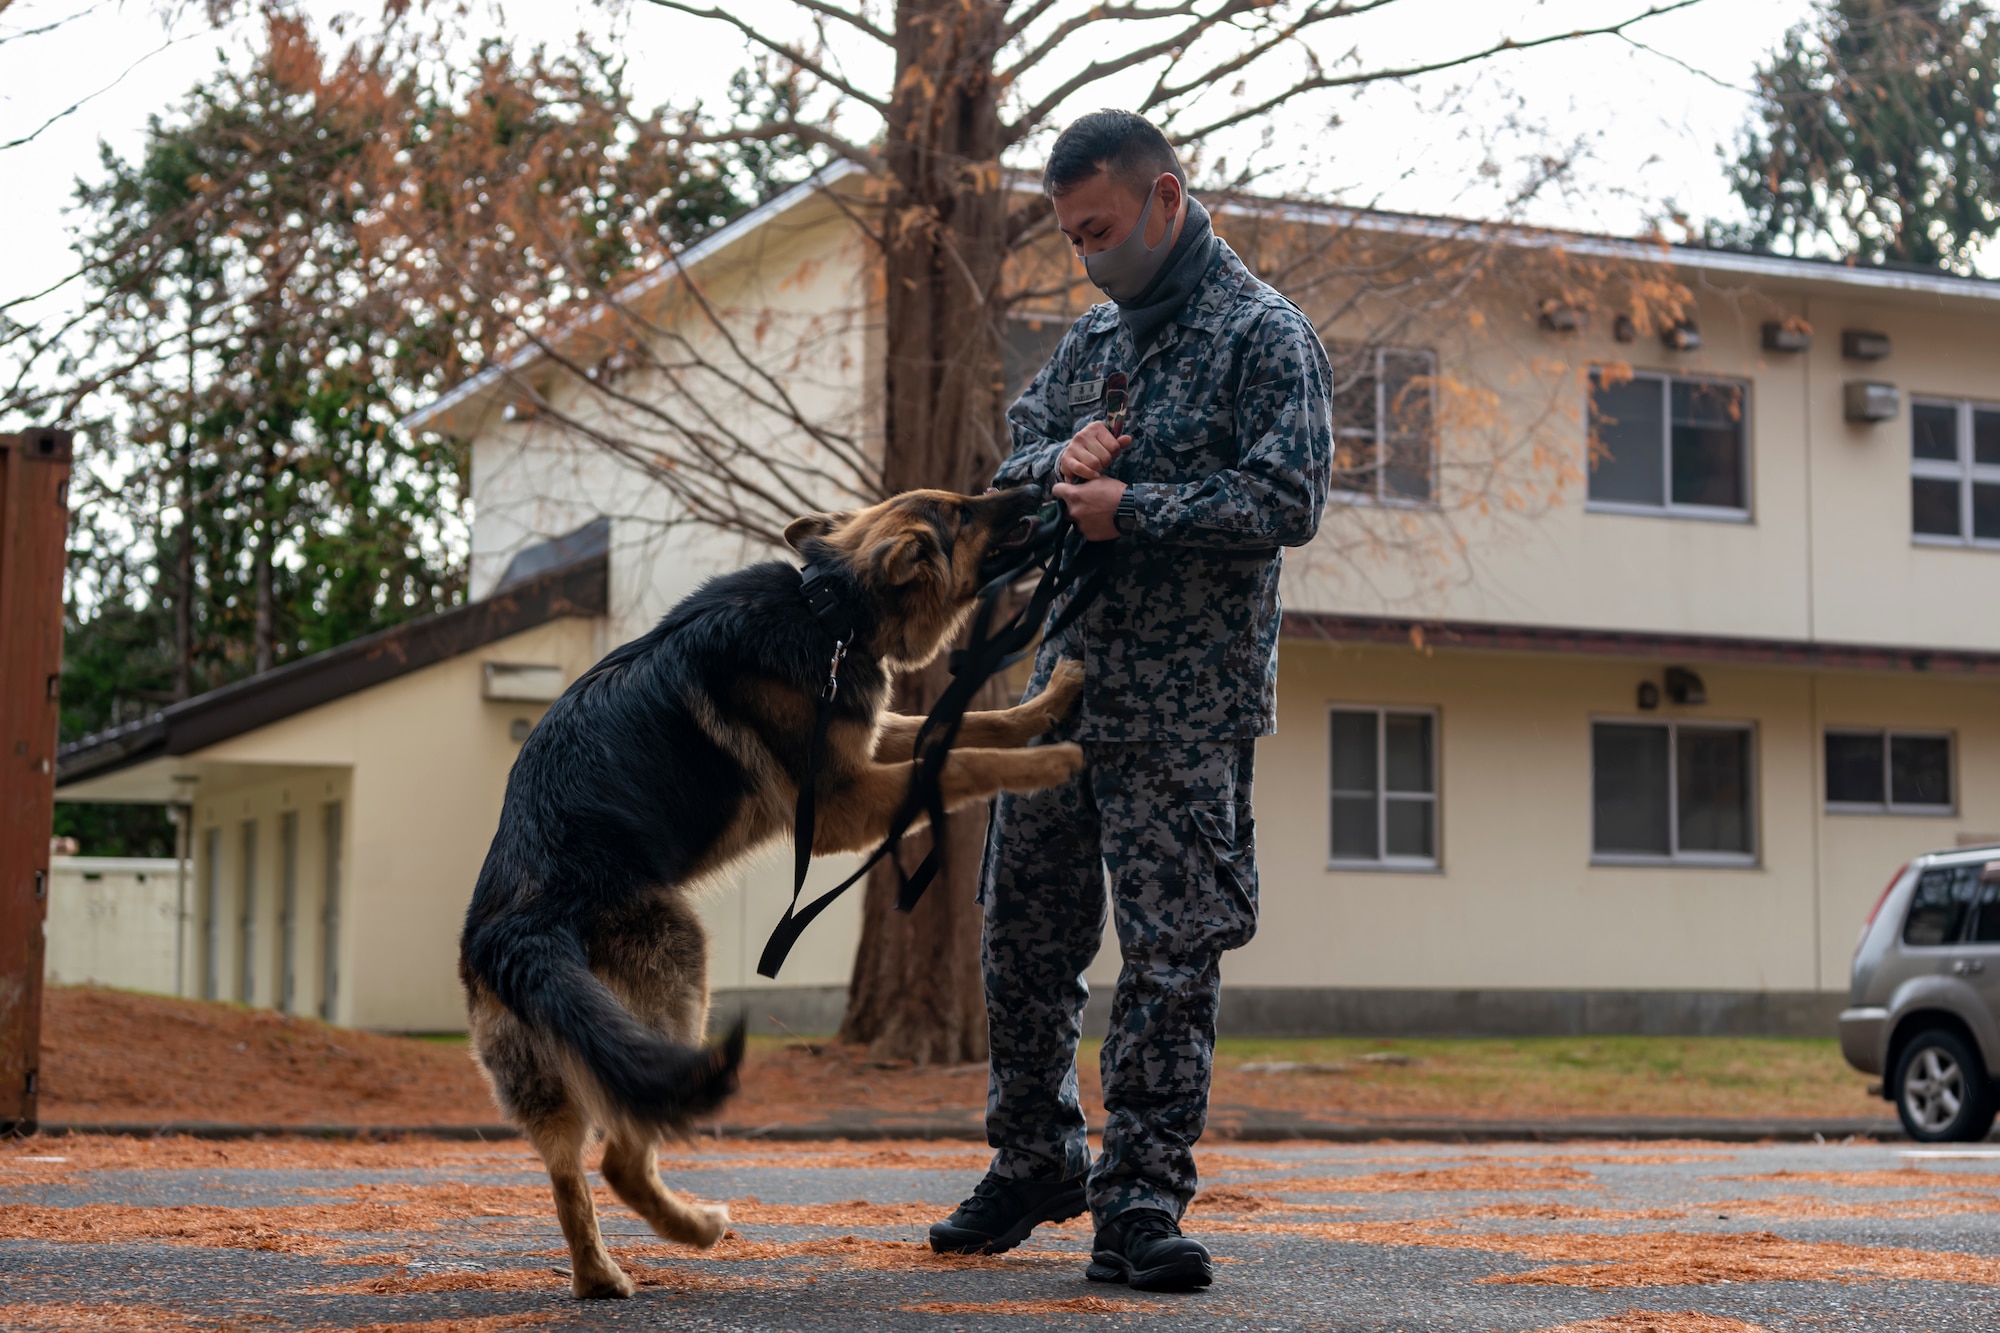 U.S. Air Force and Japan Air Self-Defense Force members work together during a bilateral training event at Misawa Air Base, Japan, Nov. 29, 2022. This multi-day training event allowed JASDF members a chance to see how U.S. Air Force military working dog handlers train their dogs. (U.S. Air Force photo by Senior Airman Antwain Hanks)